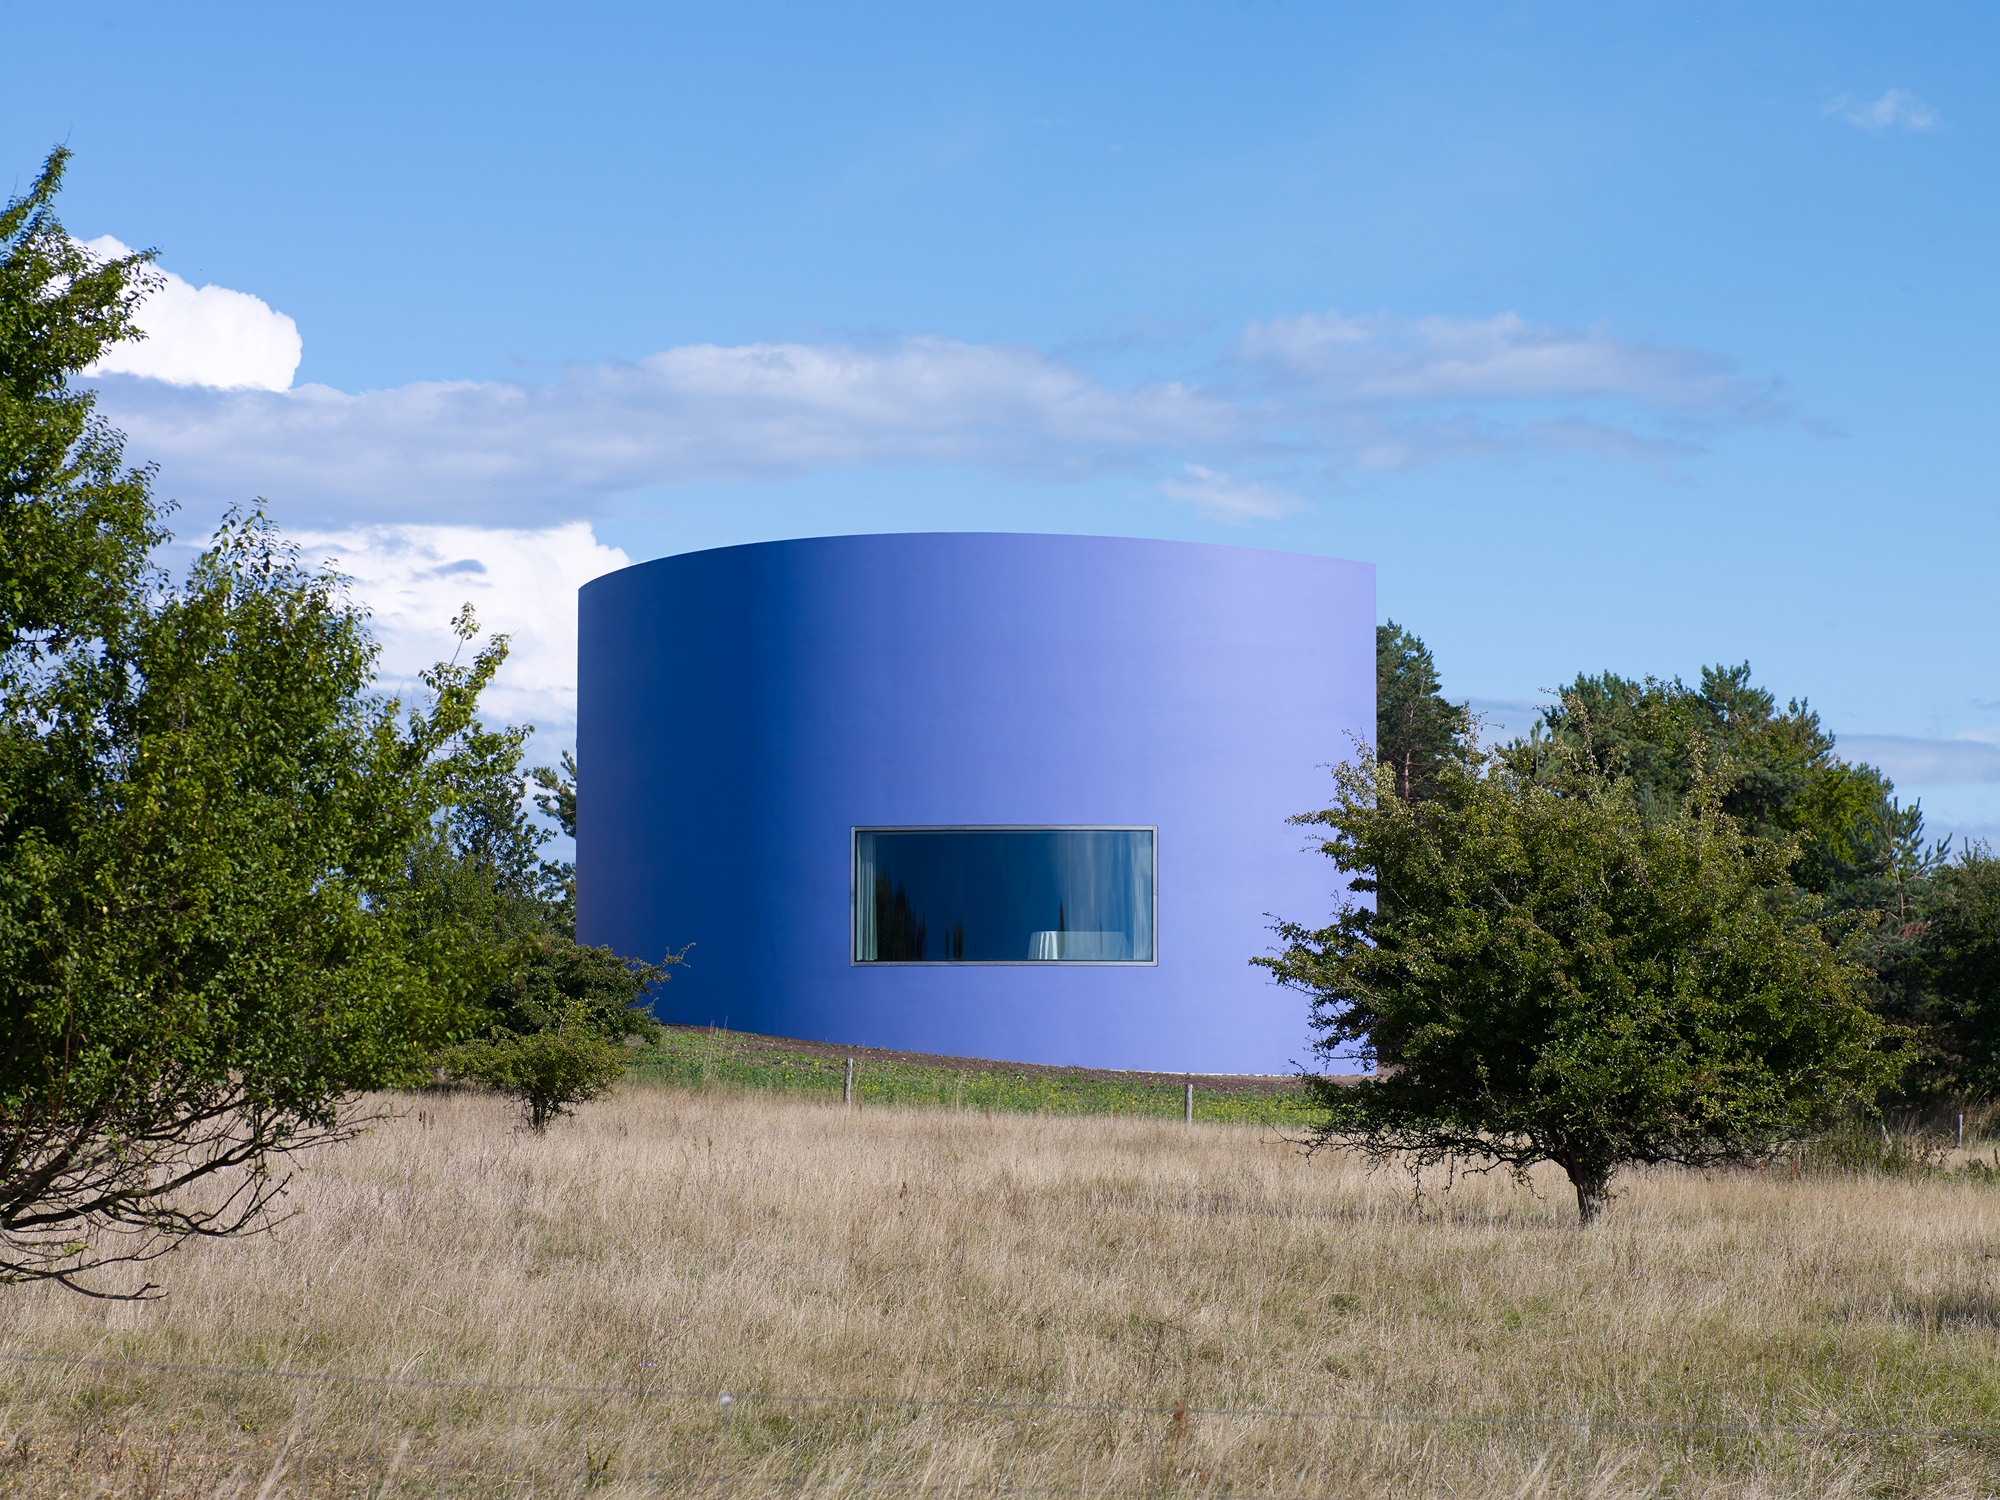 The Triple Folly pavilion by Thomas Demand and Caruso St John Architects for Kvadrat